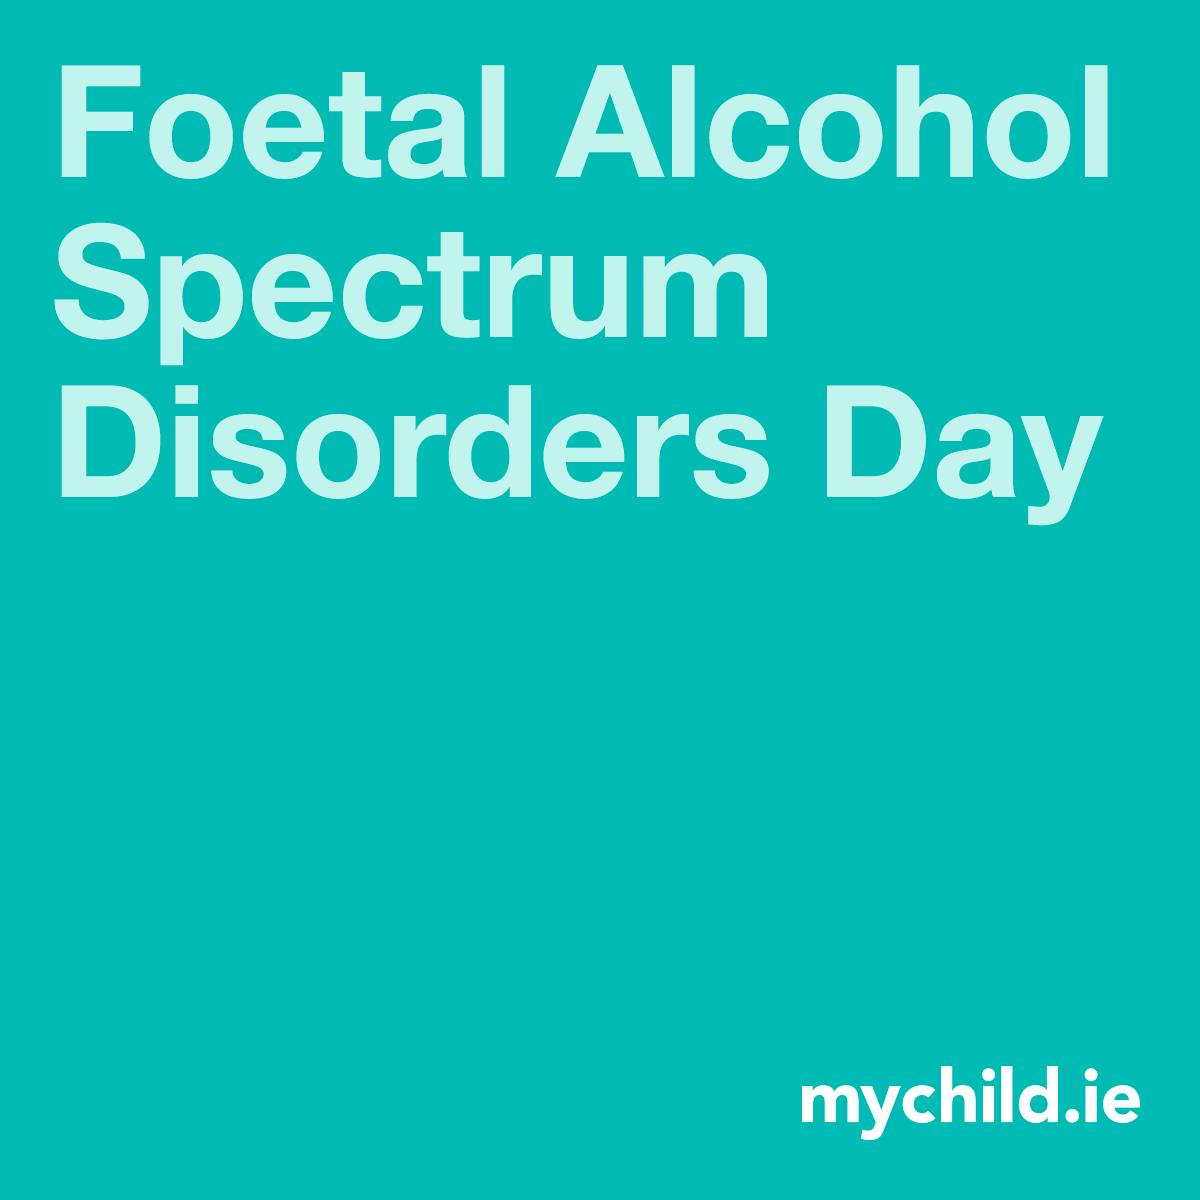 No amount of alcohol at any stage of pregnancy is safe for your baby. FASD (foetal alcohol spectrum disorders) Day is an opportunity to learn about the importance of an alcohol-free pregnancy. Learn more: bit.ly/44Fjo9L #HSEMyChild | #FASD